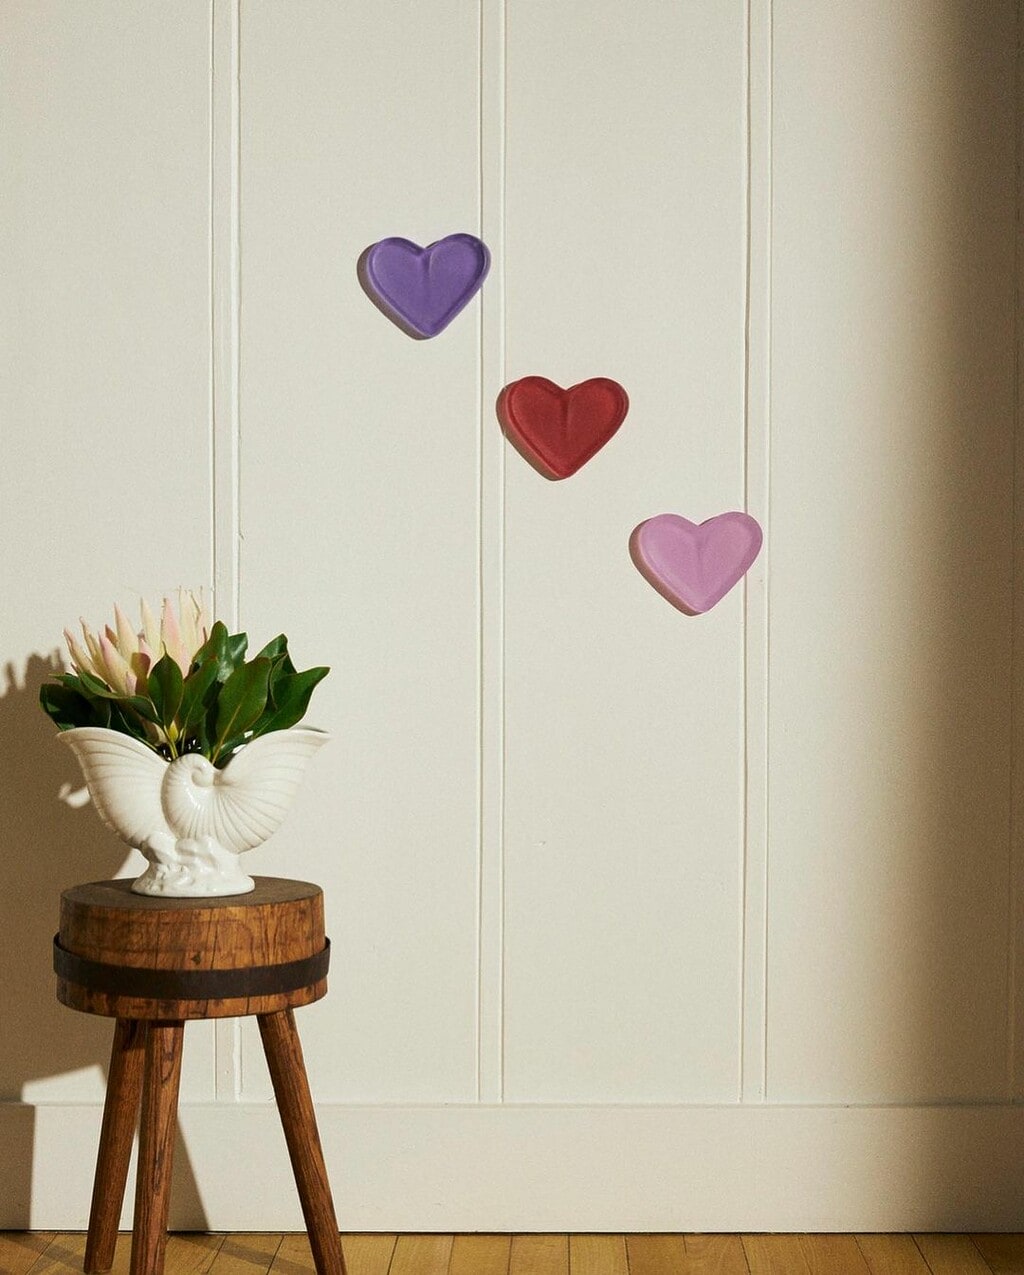 @simonlewiswards uses heart artwork to add colour to a neutral home.